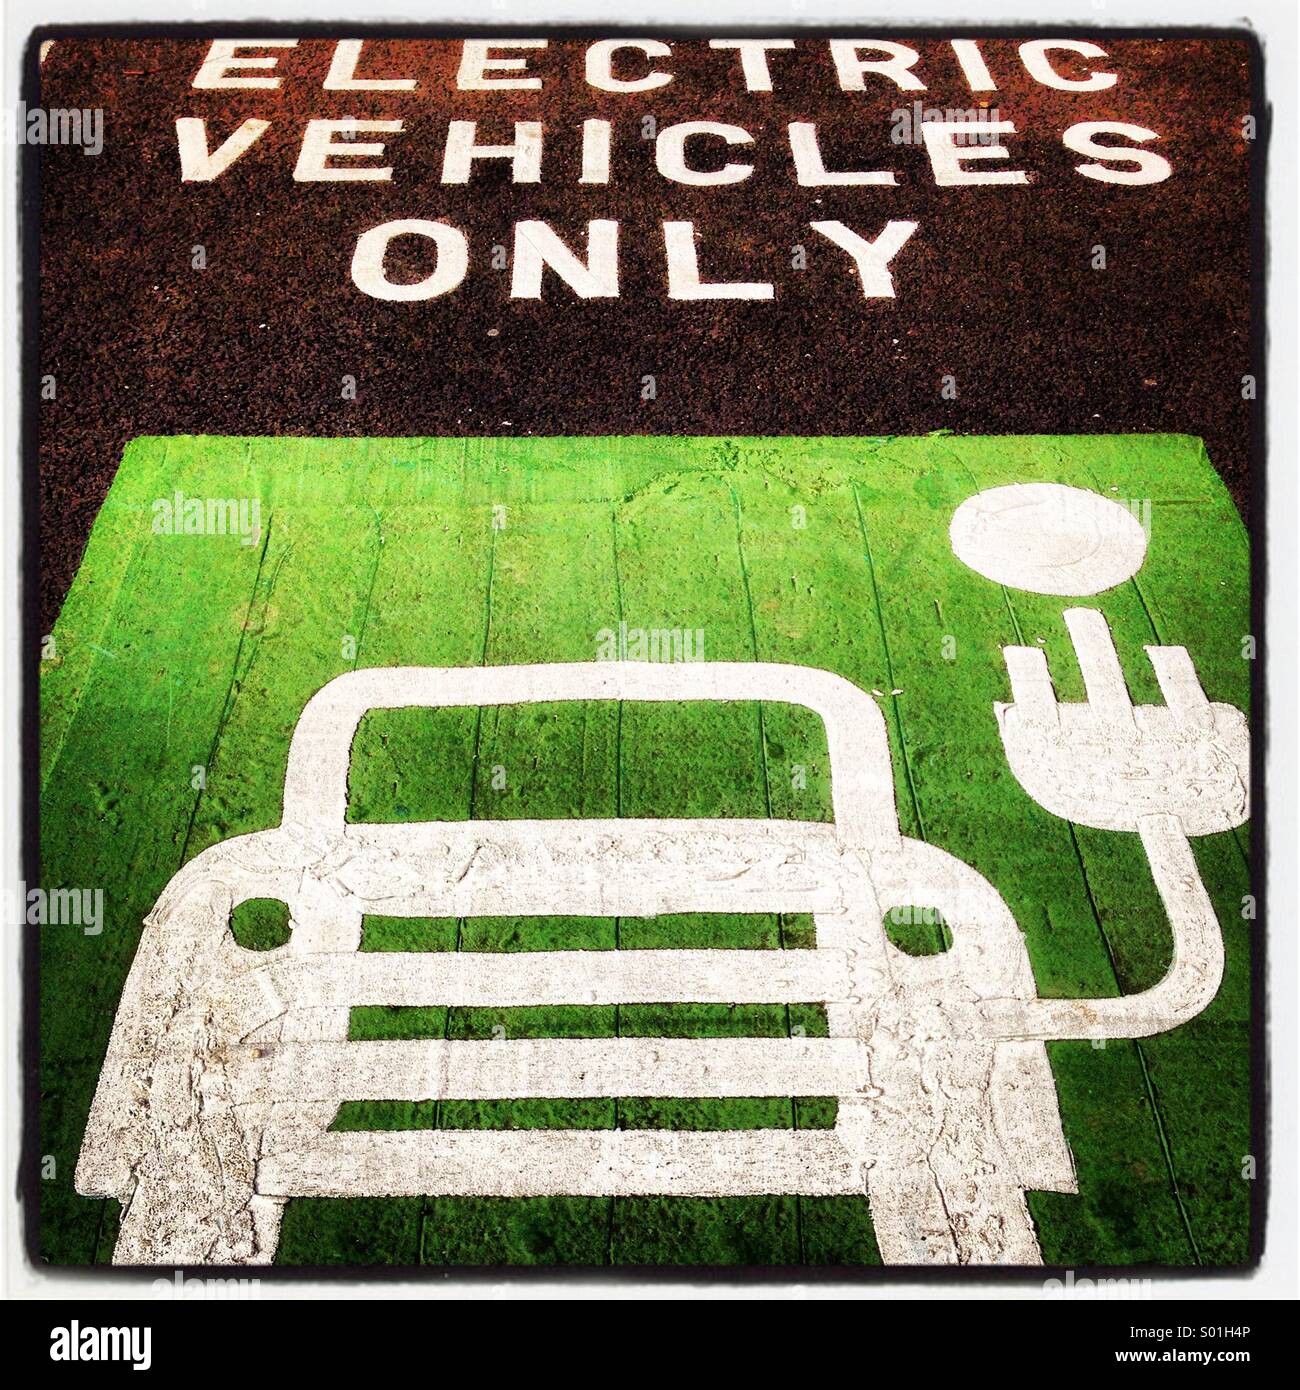 Parking space and recharging point for electric vehicles. Stock Photo